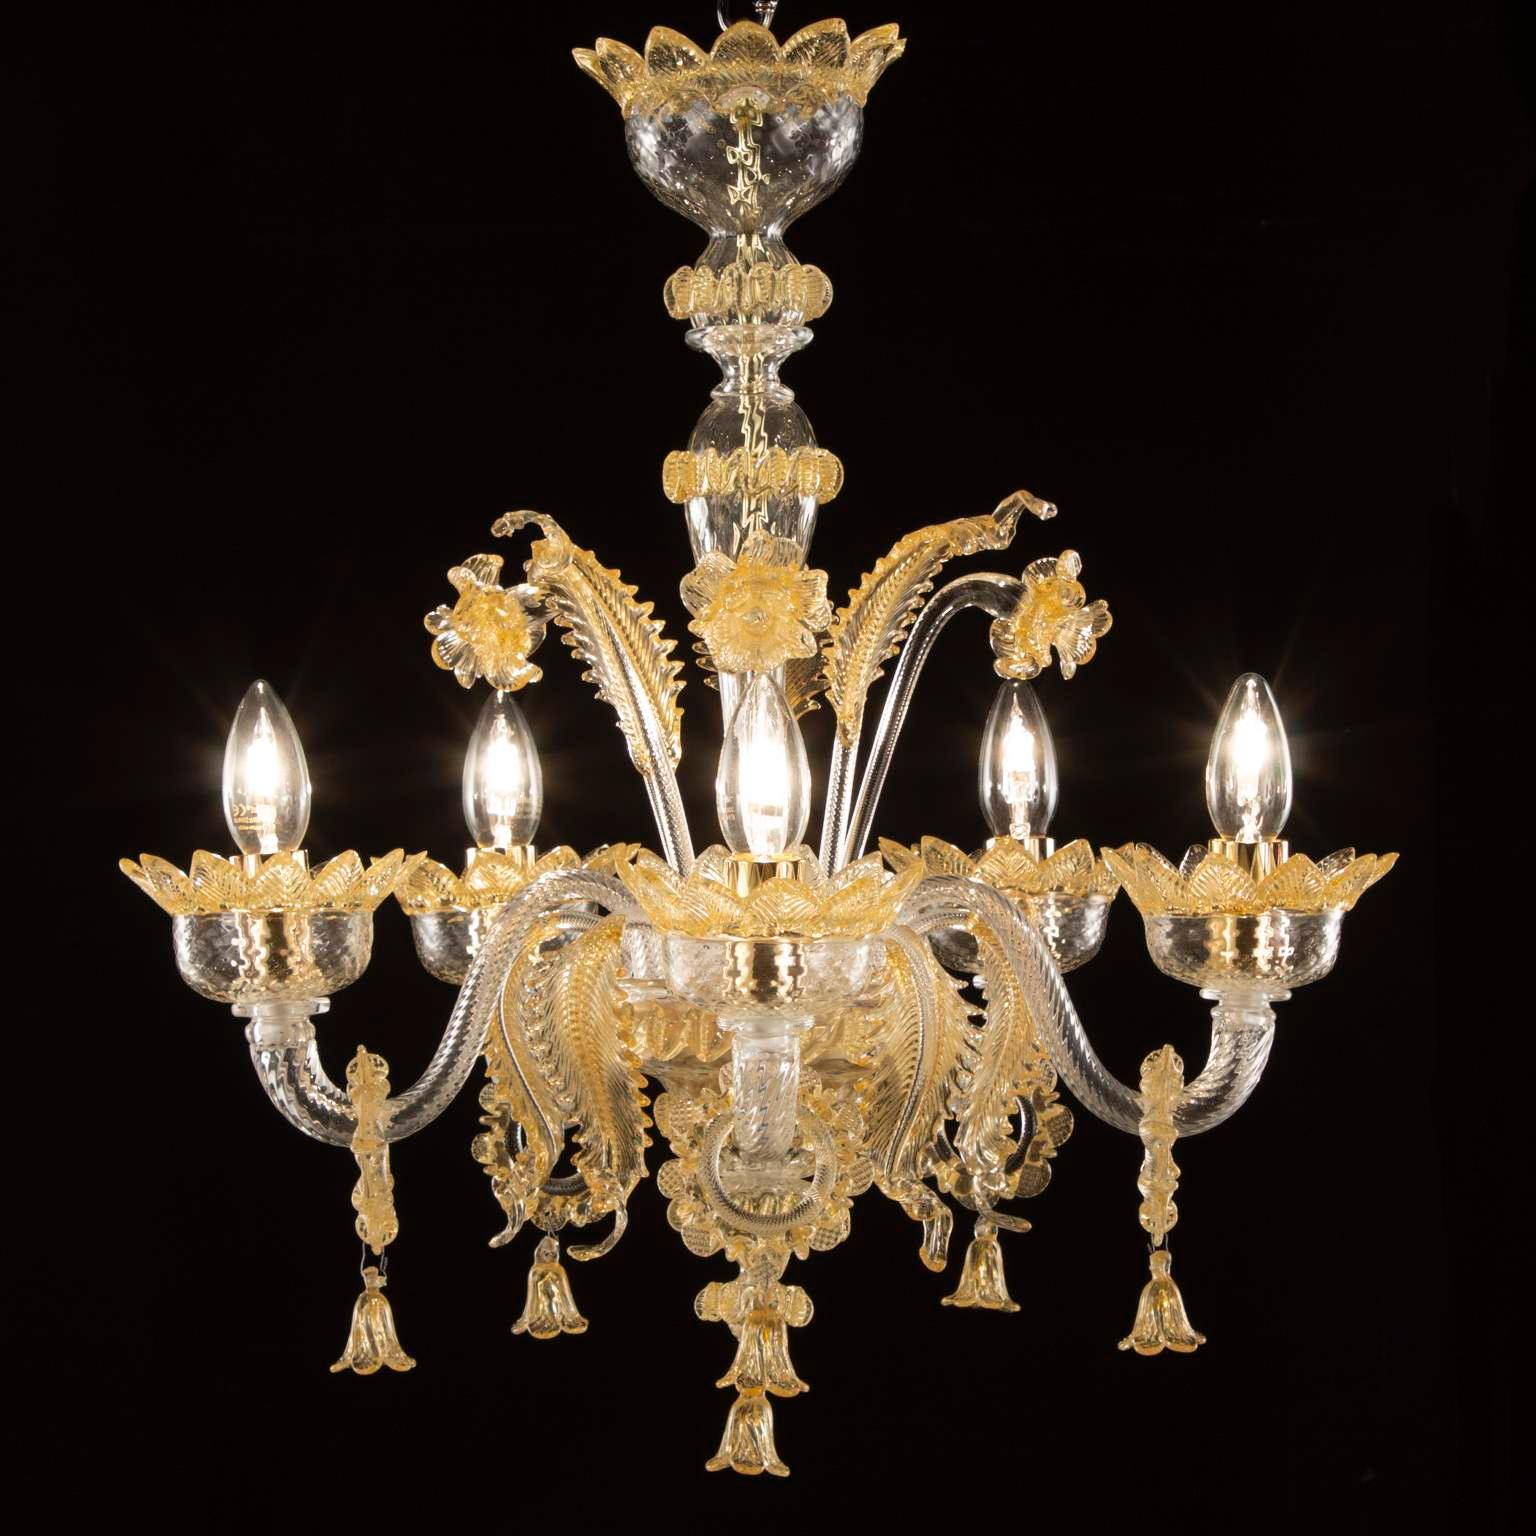 Classic chandelier 5 arms clear and amber Murano glass with rings by Multiforme.
The classic Murano glass chandelier, as it is in the collective imagination. As many other chandeliers in our collections, V-Classic 800 is designed with attention to